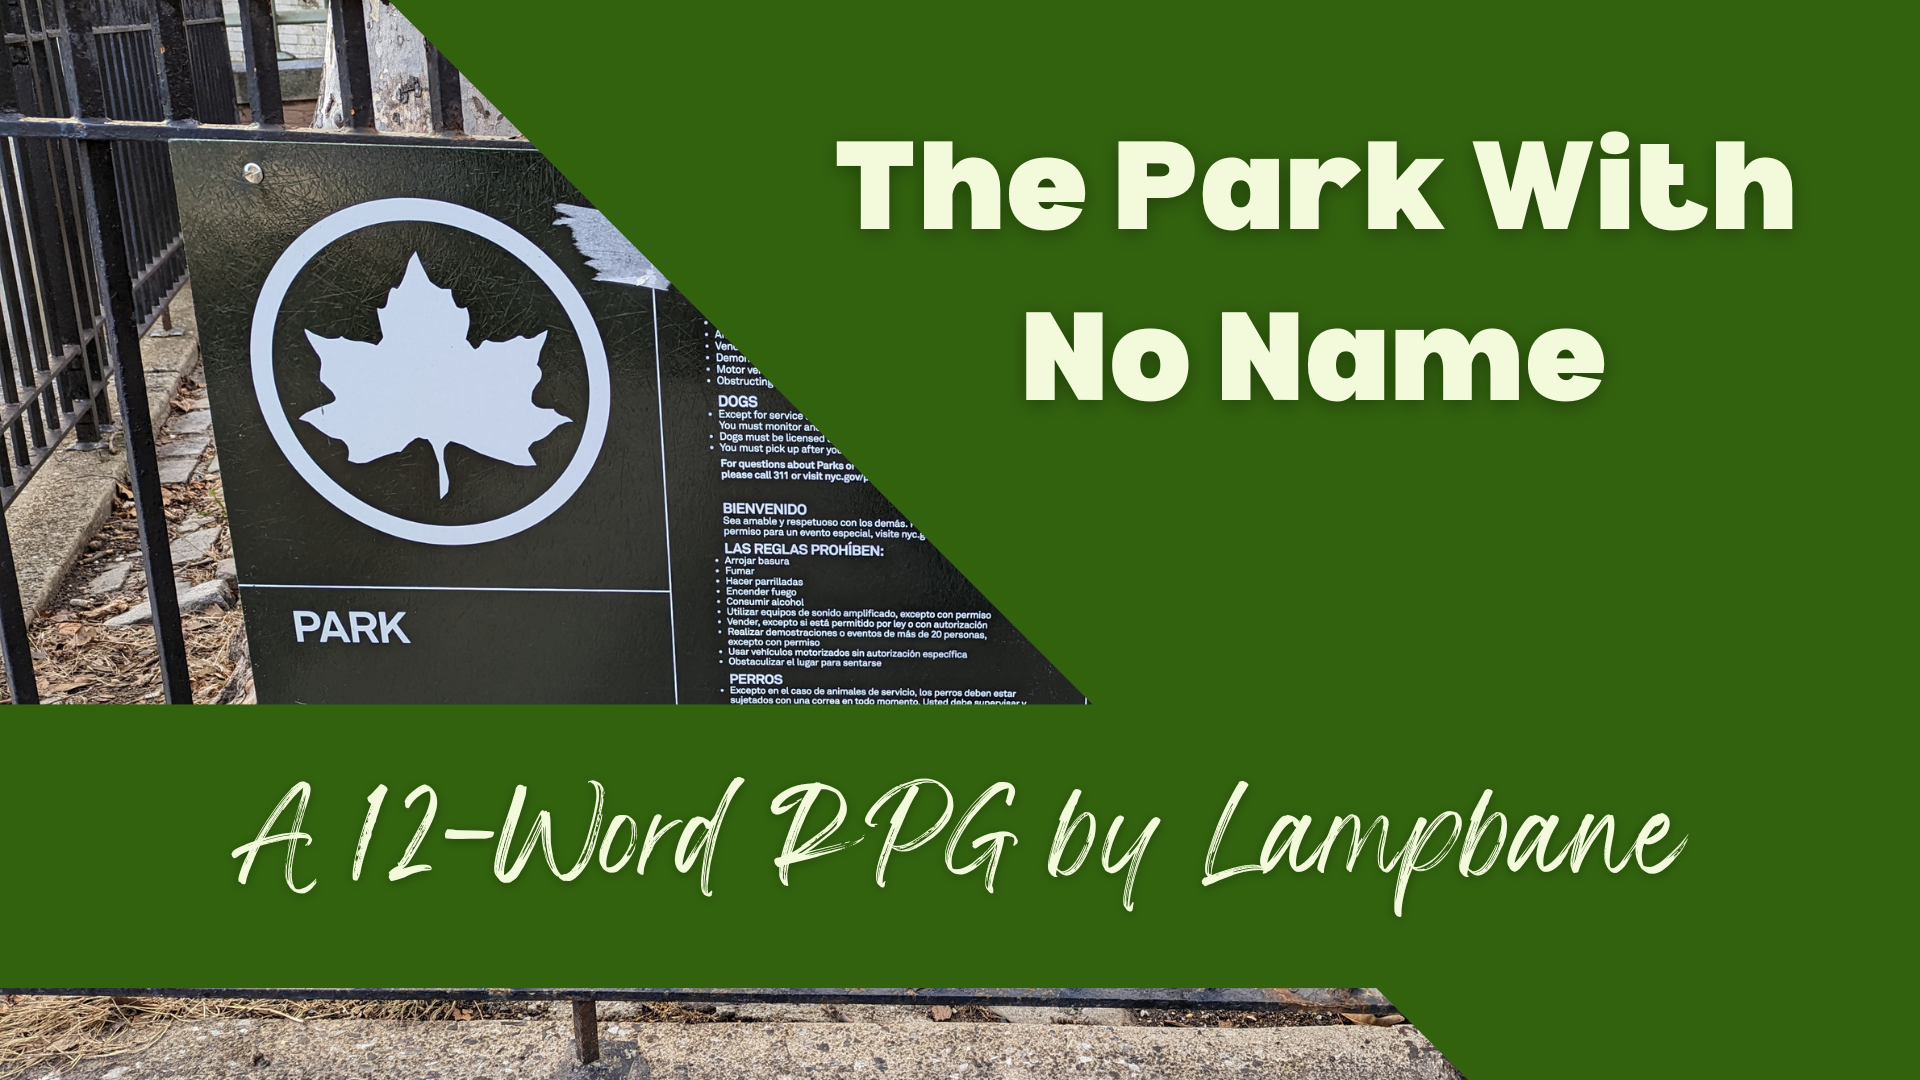 The Park With No Name